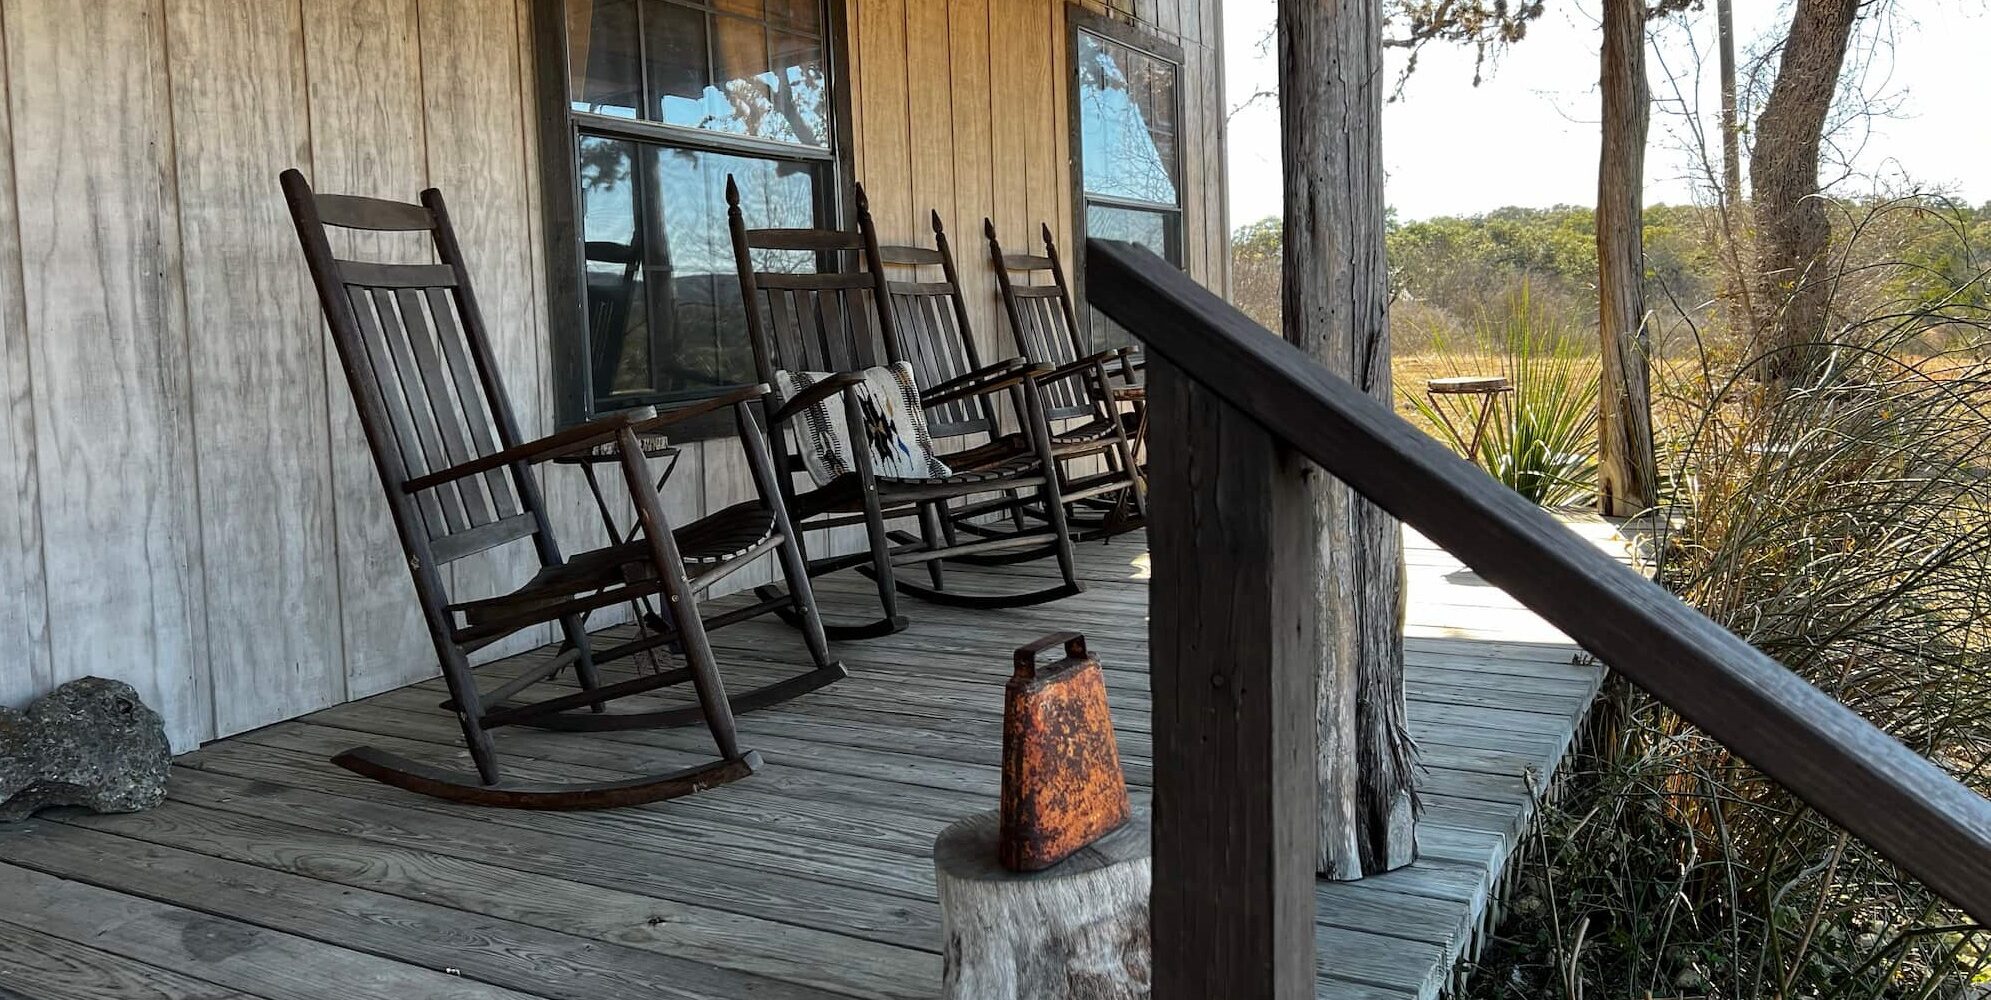 Empty rocking chairs sit abreast on the front porch of the lodge